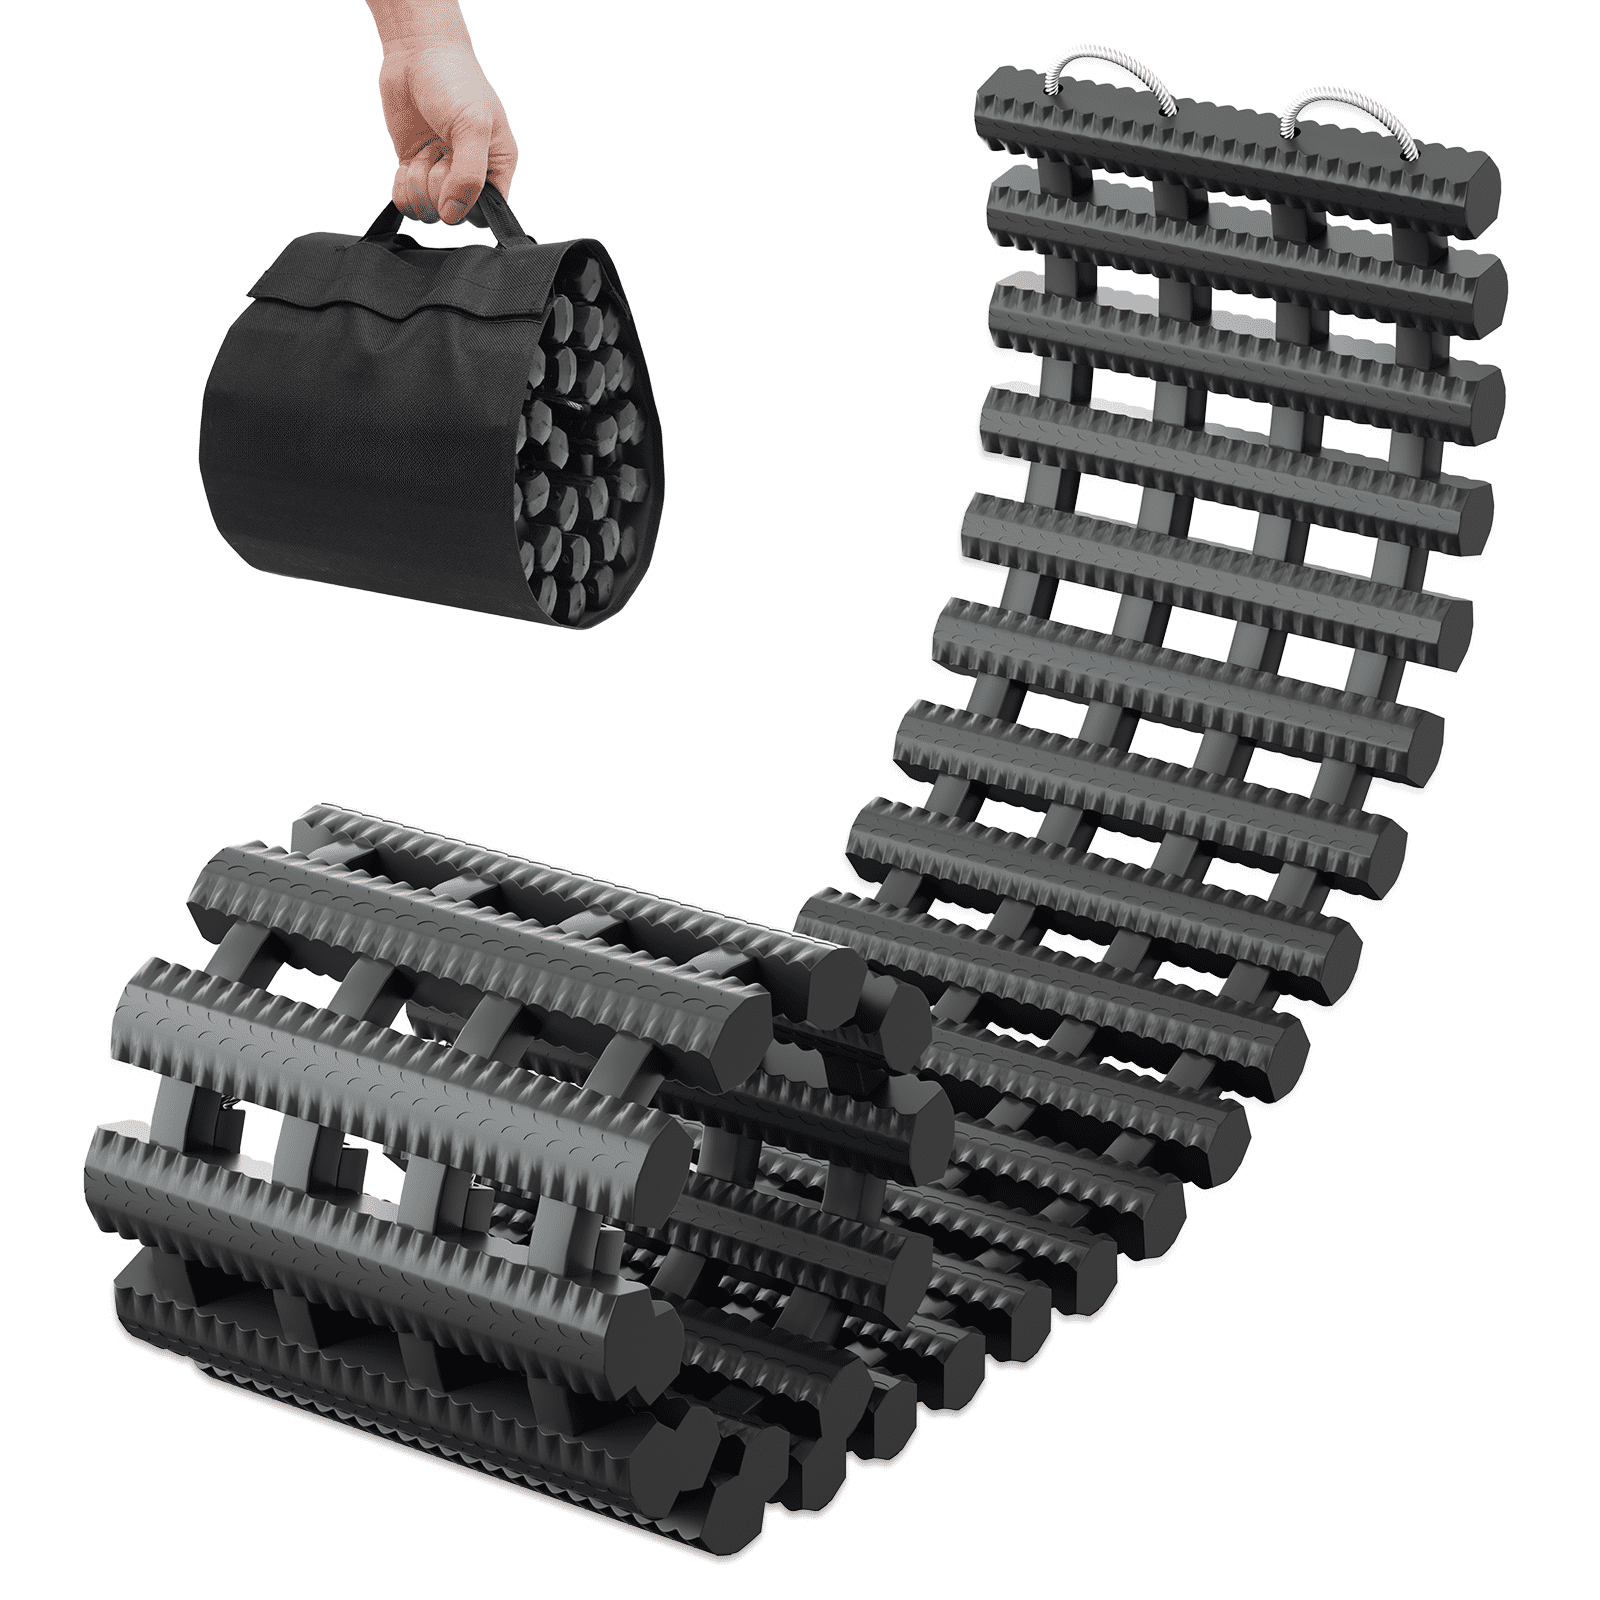 Costway 2 Pcs Recovery Traction Tracks Mat Mud Sand Snow Tier